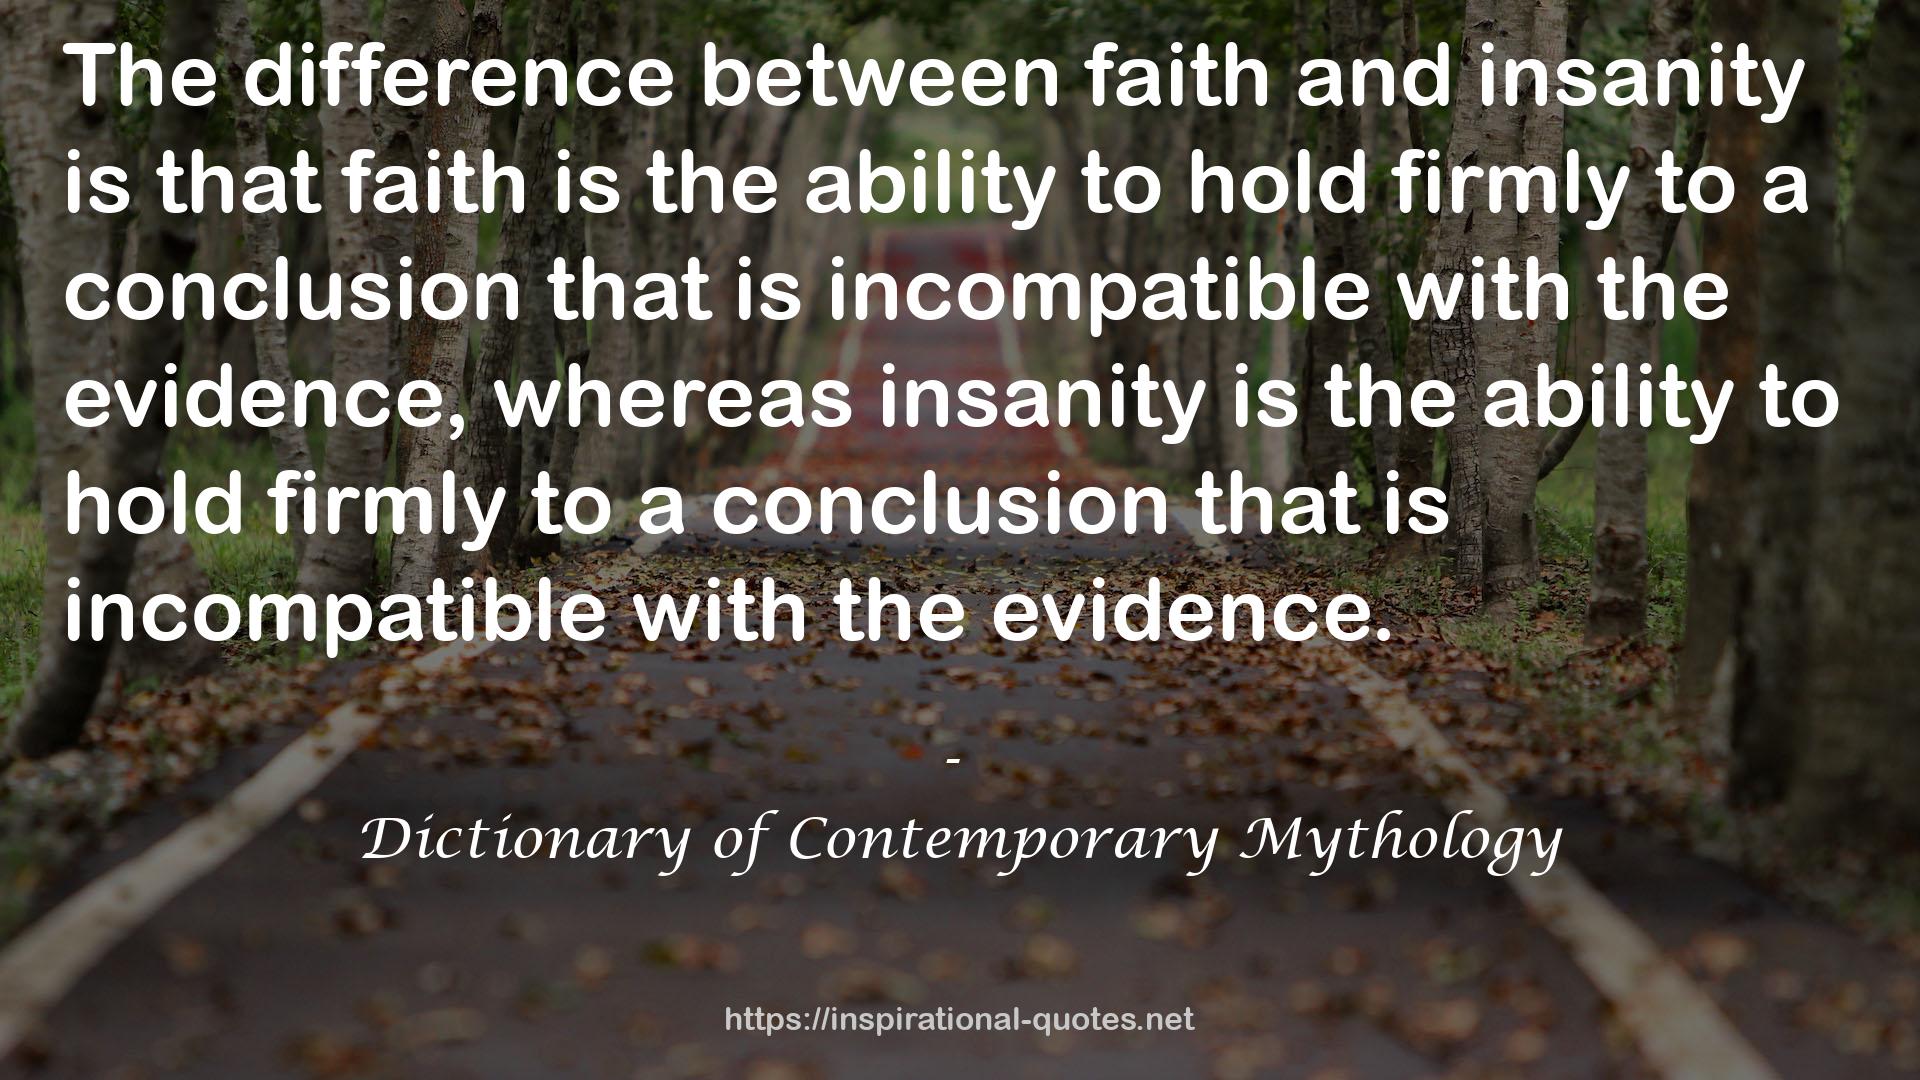 Dictionary of Contemporary Mythology QUOTES